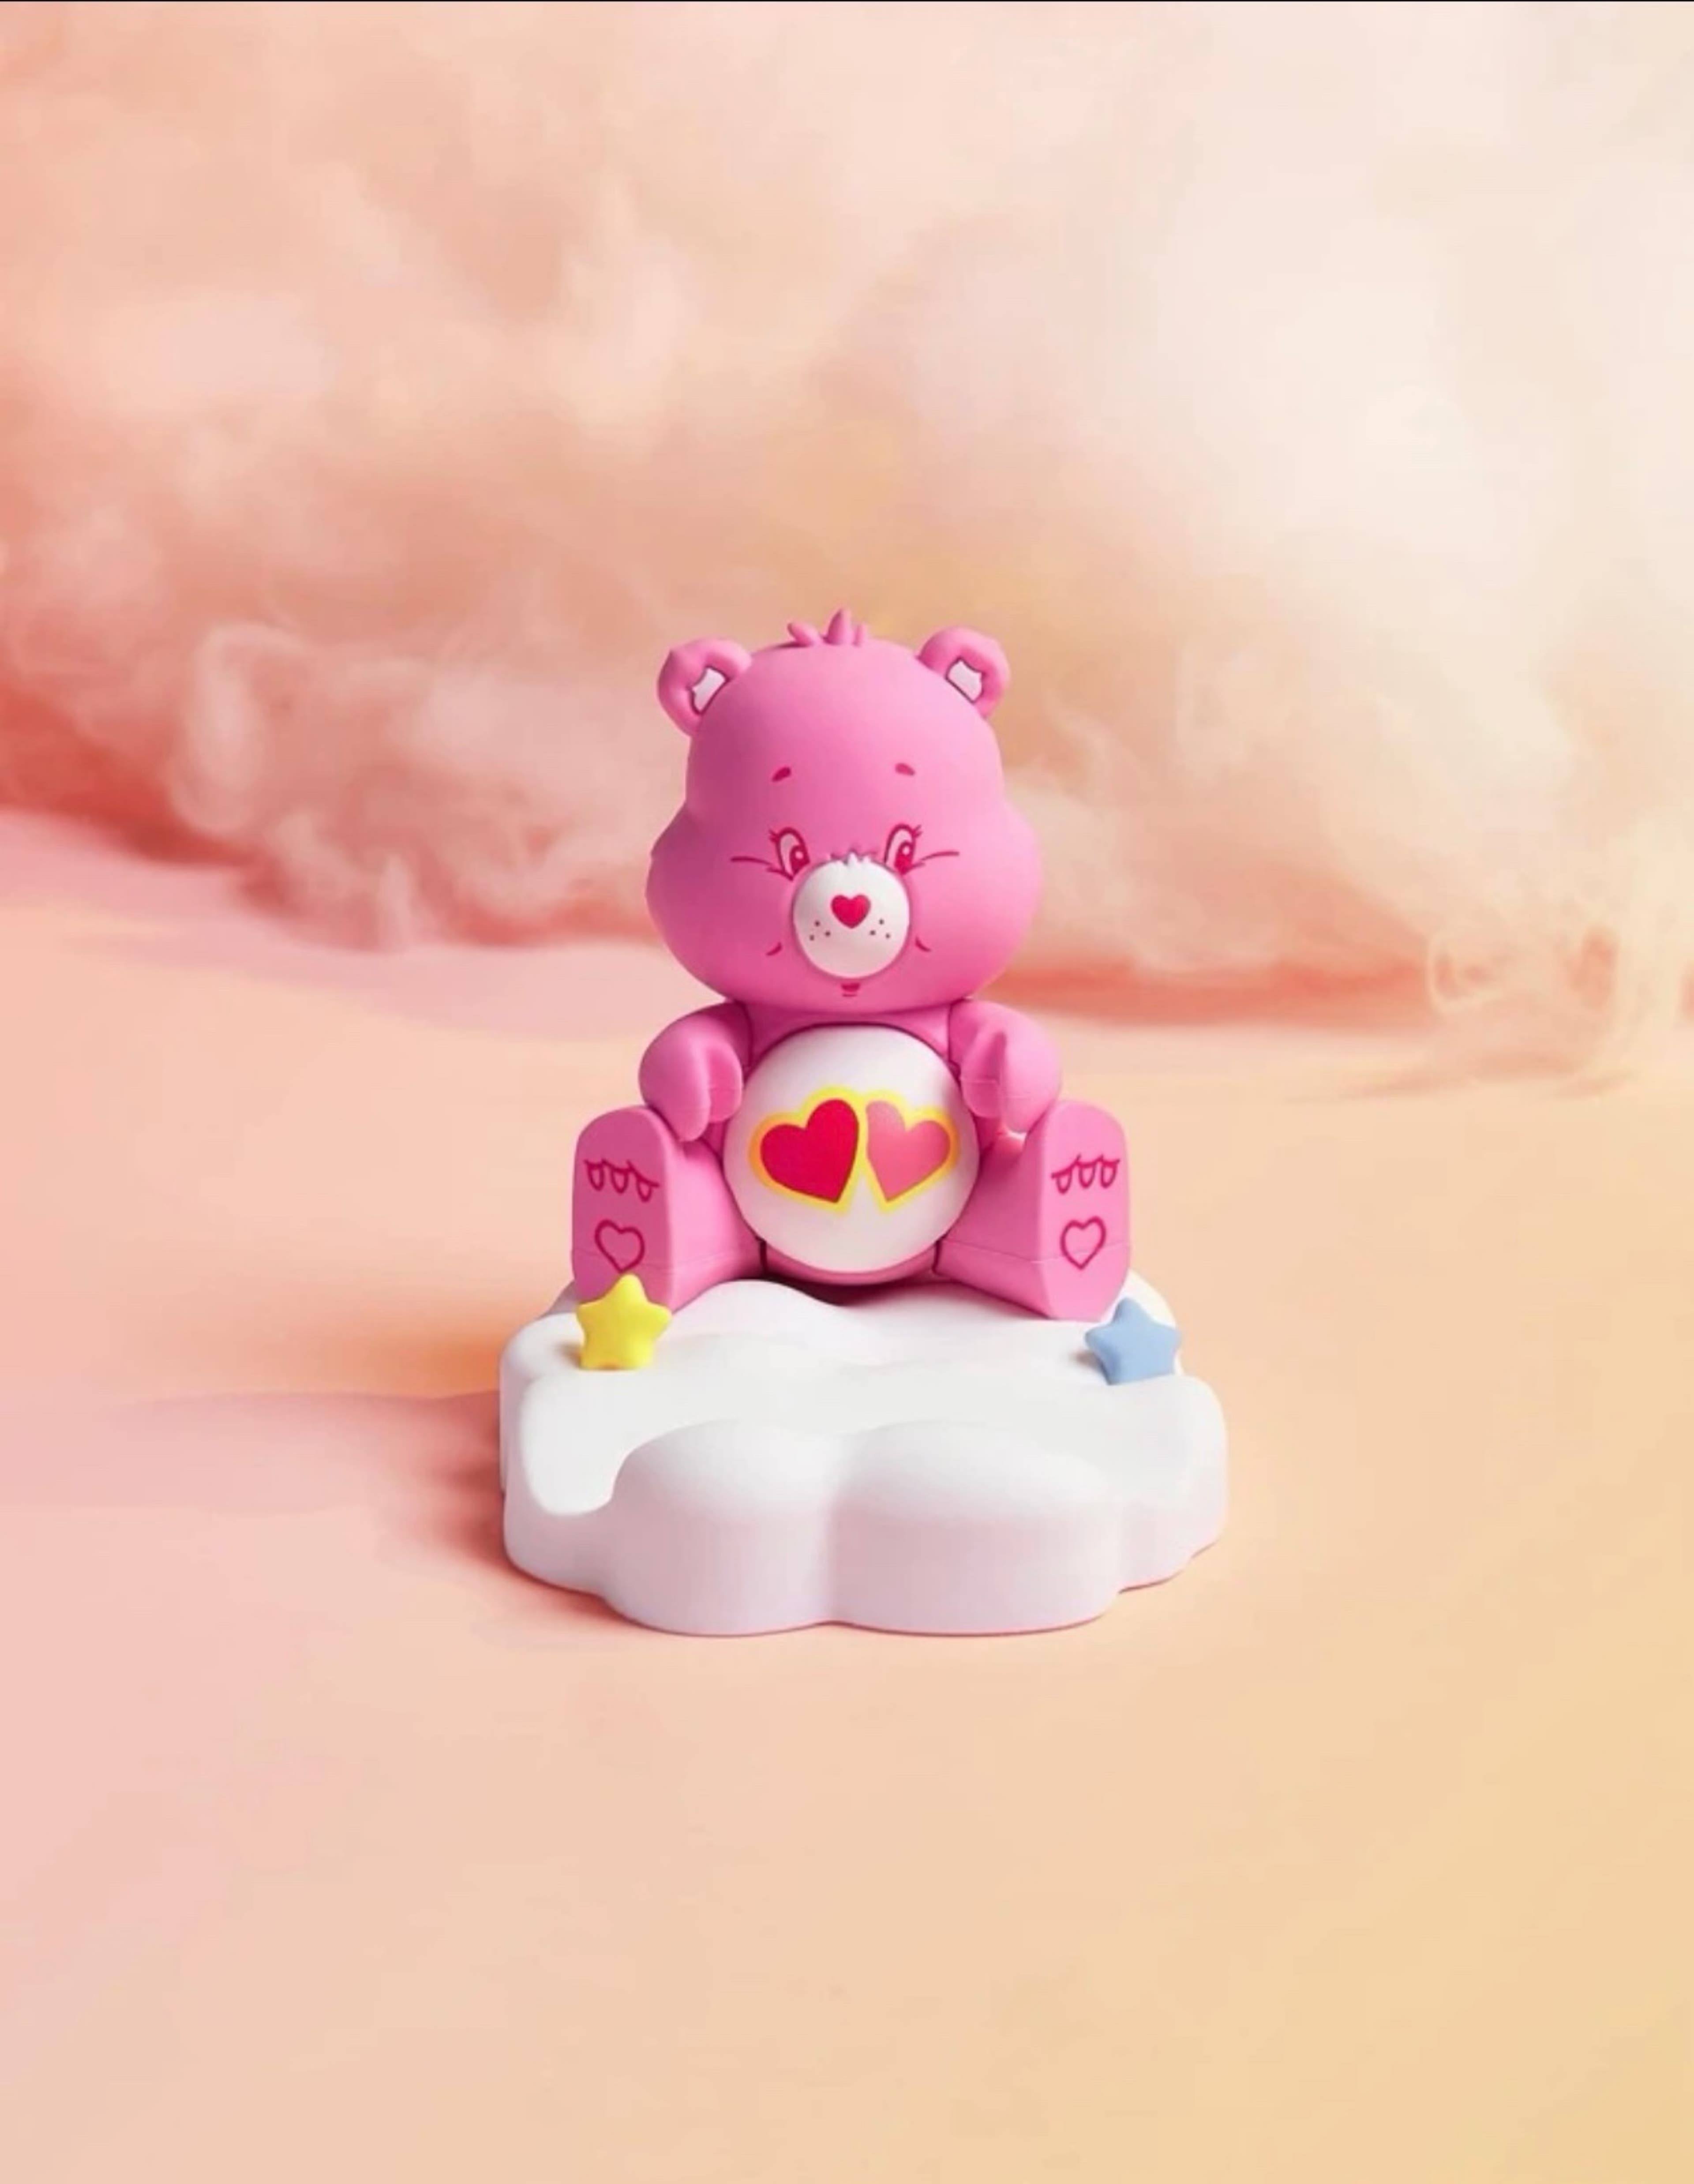 A pink teddy bear sitting on top of clouds - Care Bears